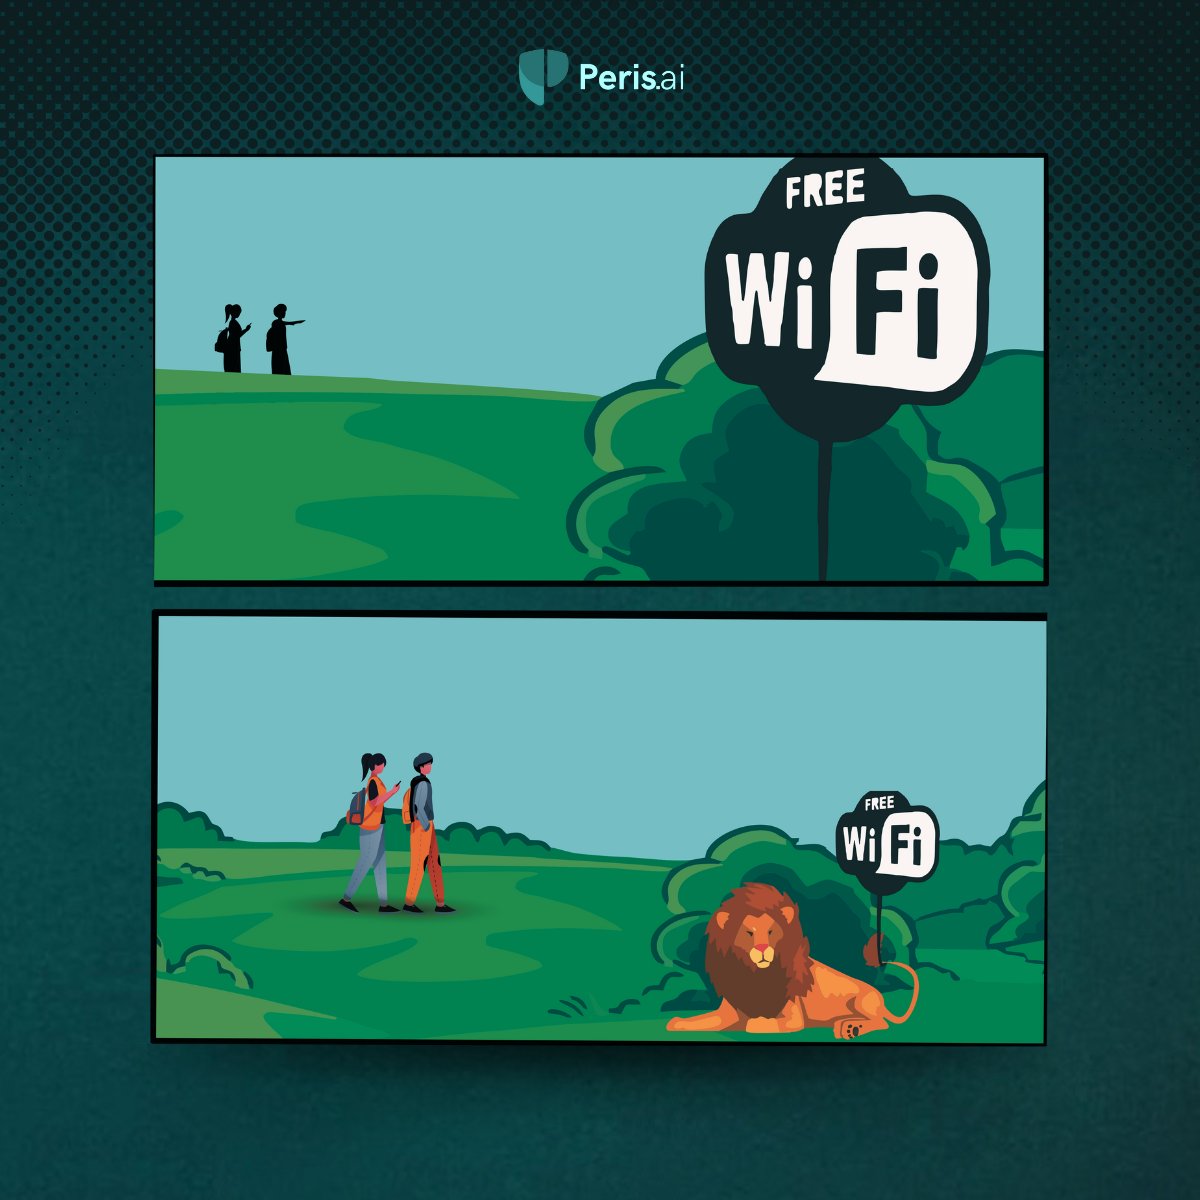 Shield Your Data, Dodge the Dangers of Deceptive Wi-Fi! 🛡️📶 

No matter where you are. Your data's safety is non-negotiable! 

#DataProtection #SafeSurfing #VPNUsage #FirewallFortress #SecureNetwork #DigitalSafety #Perisai #Cybersecurity #YouBuild #WeGuard